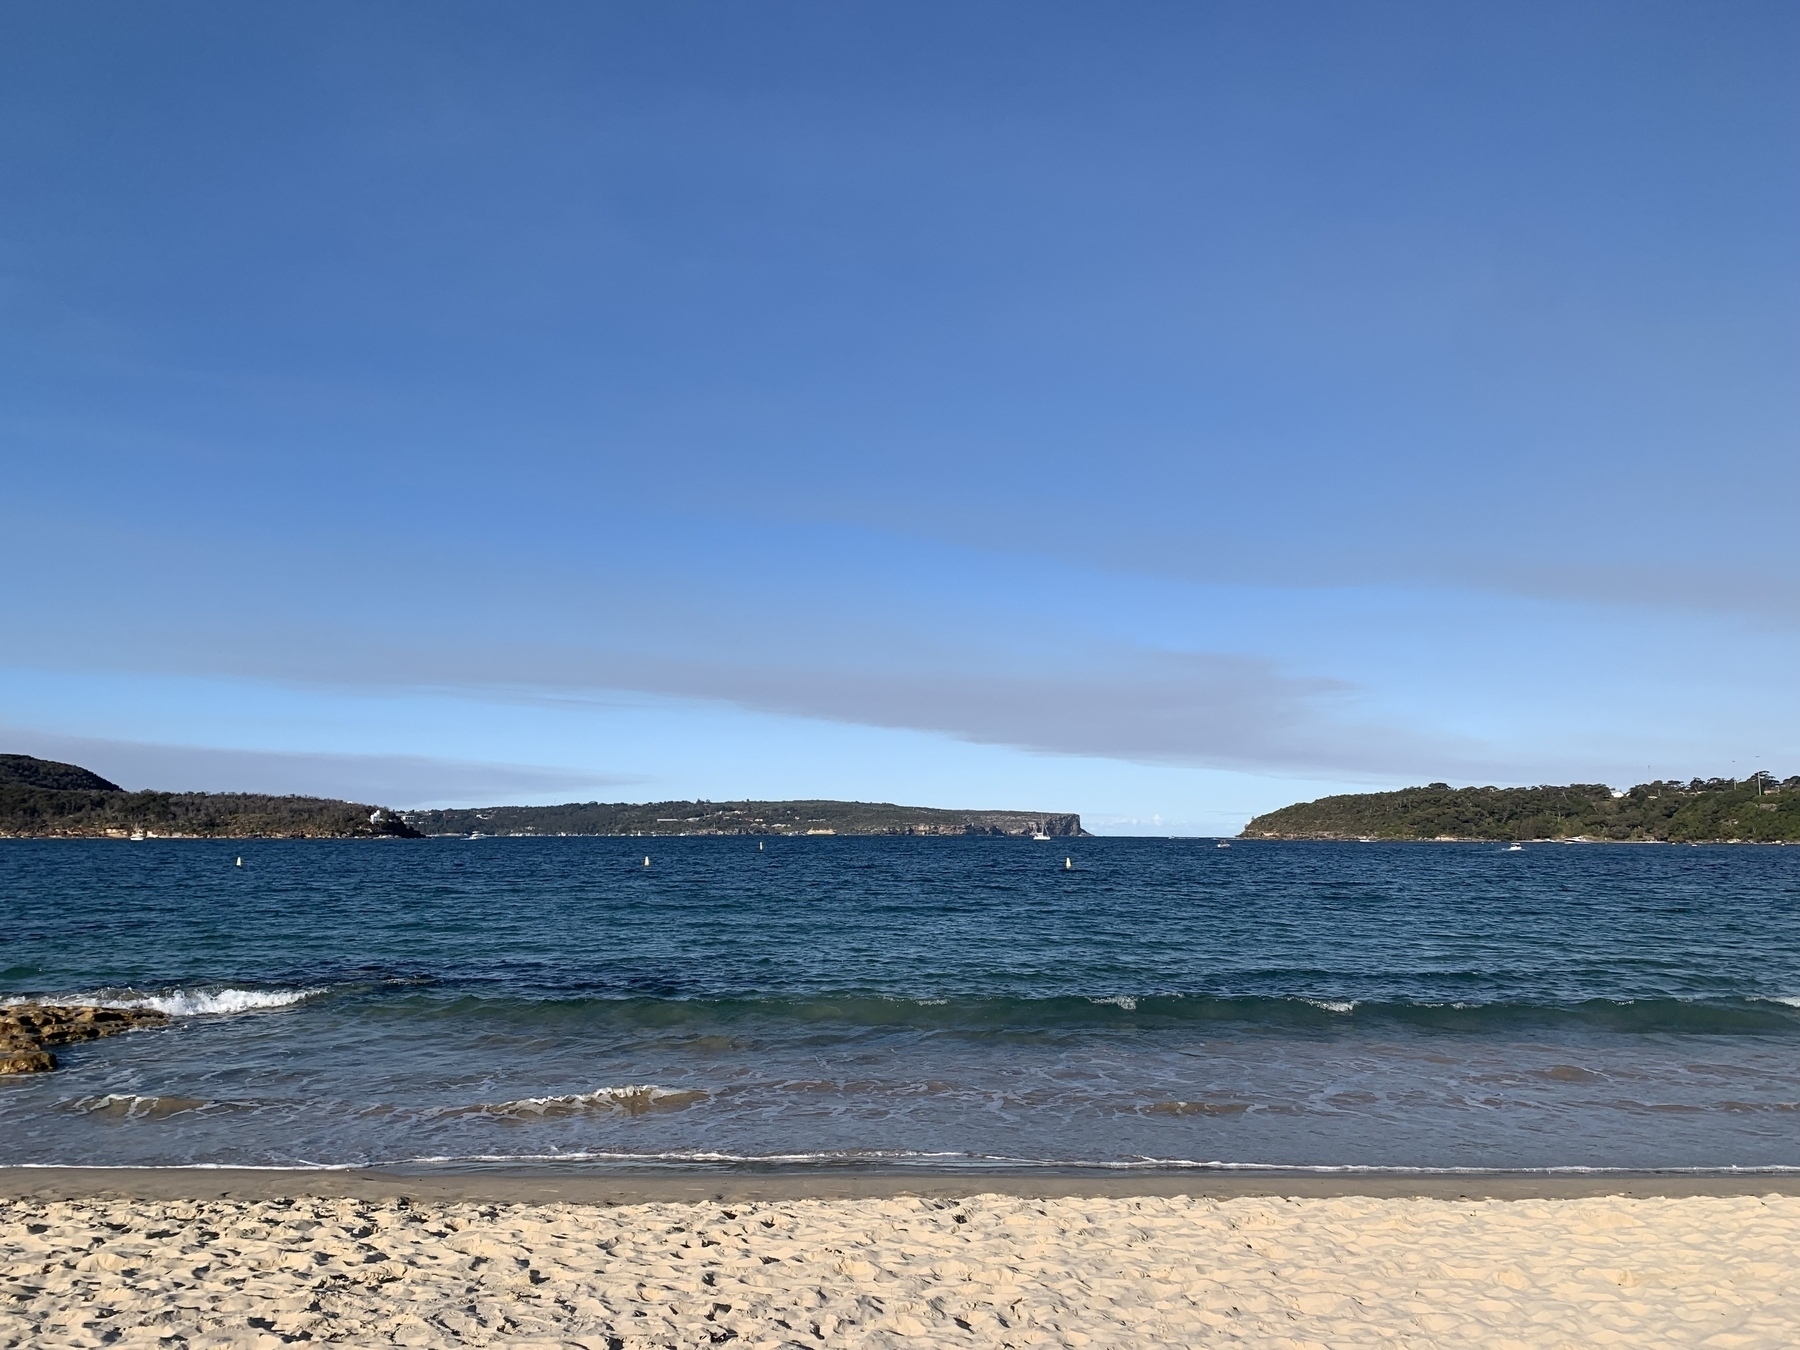 Photo of Middle Harbour, Sydney taken from Edward’s Beach facing towards the gap between Middle Head (on the right) and North Head. Blue skies over the harbour with thin strips of dirty-grey clouds.